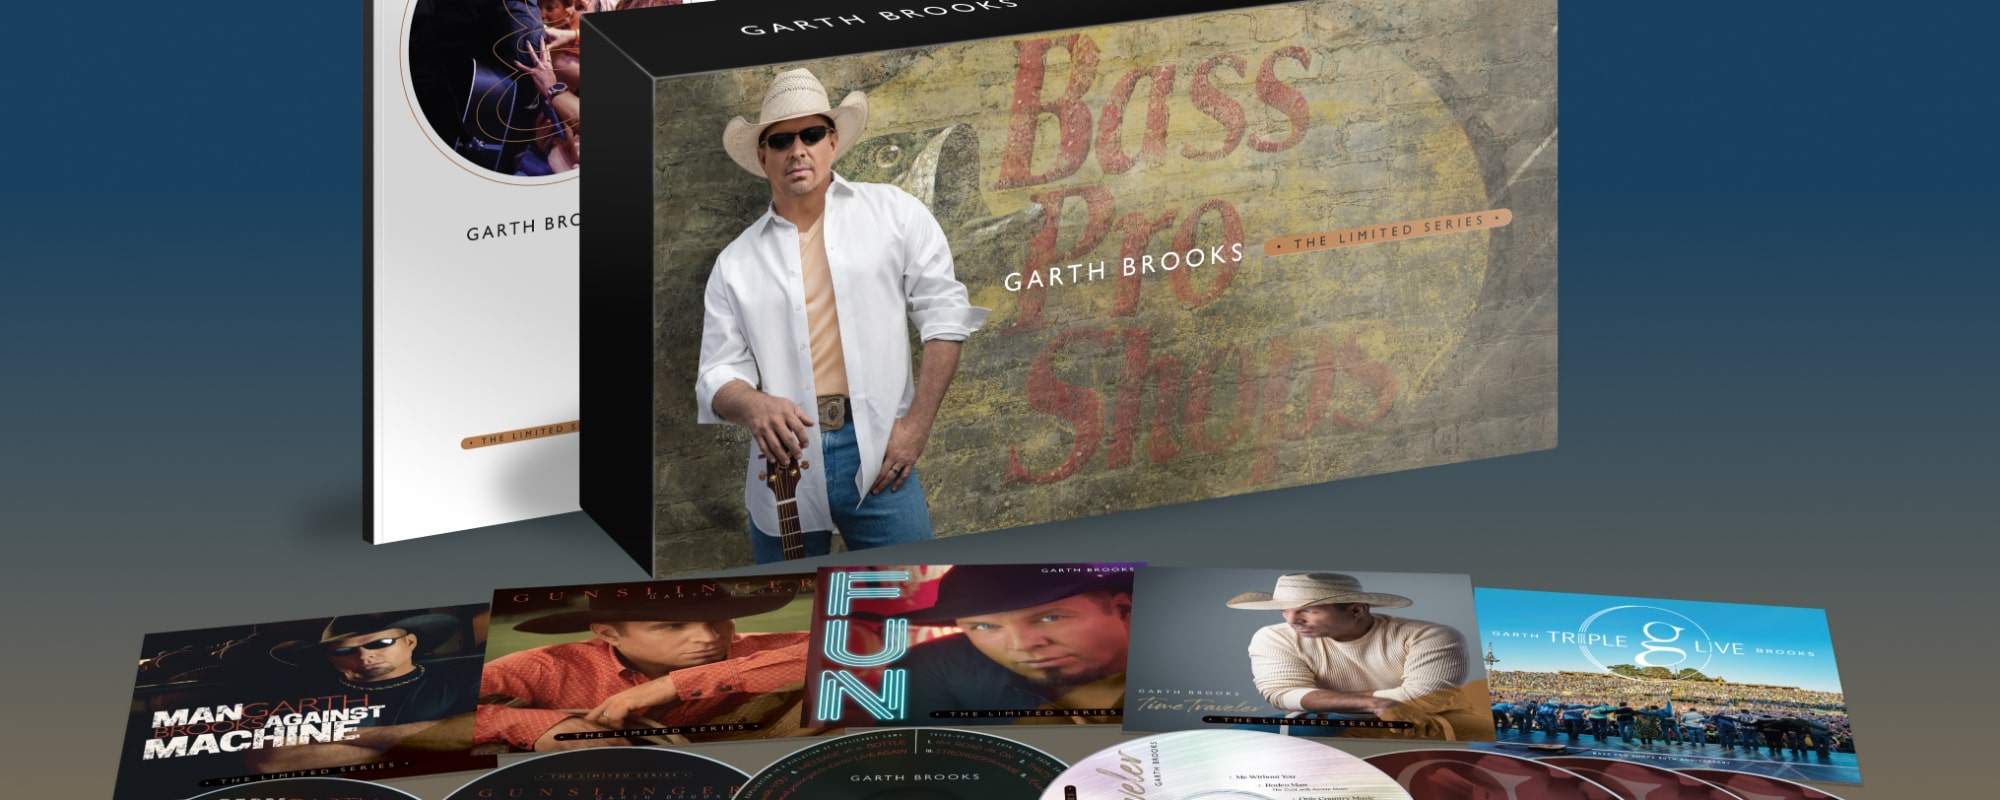 Garth Brooks Announces 14th Studio Album ‘Time Traveler’ Out November 7, but There’s a Catch